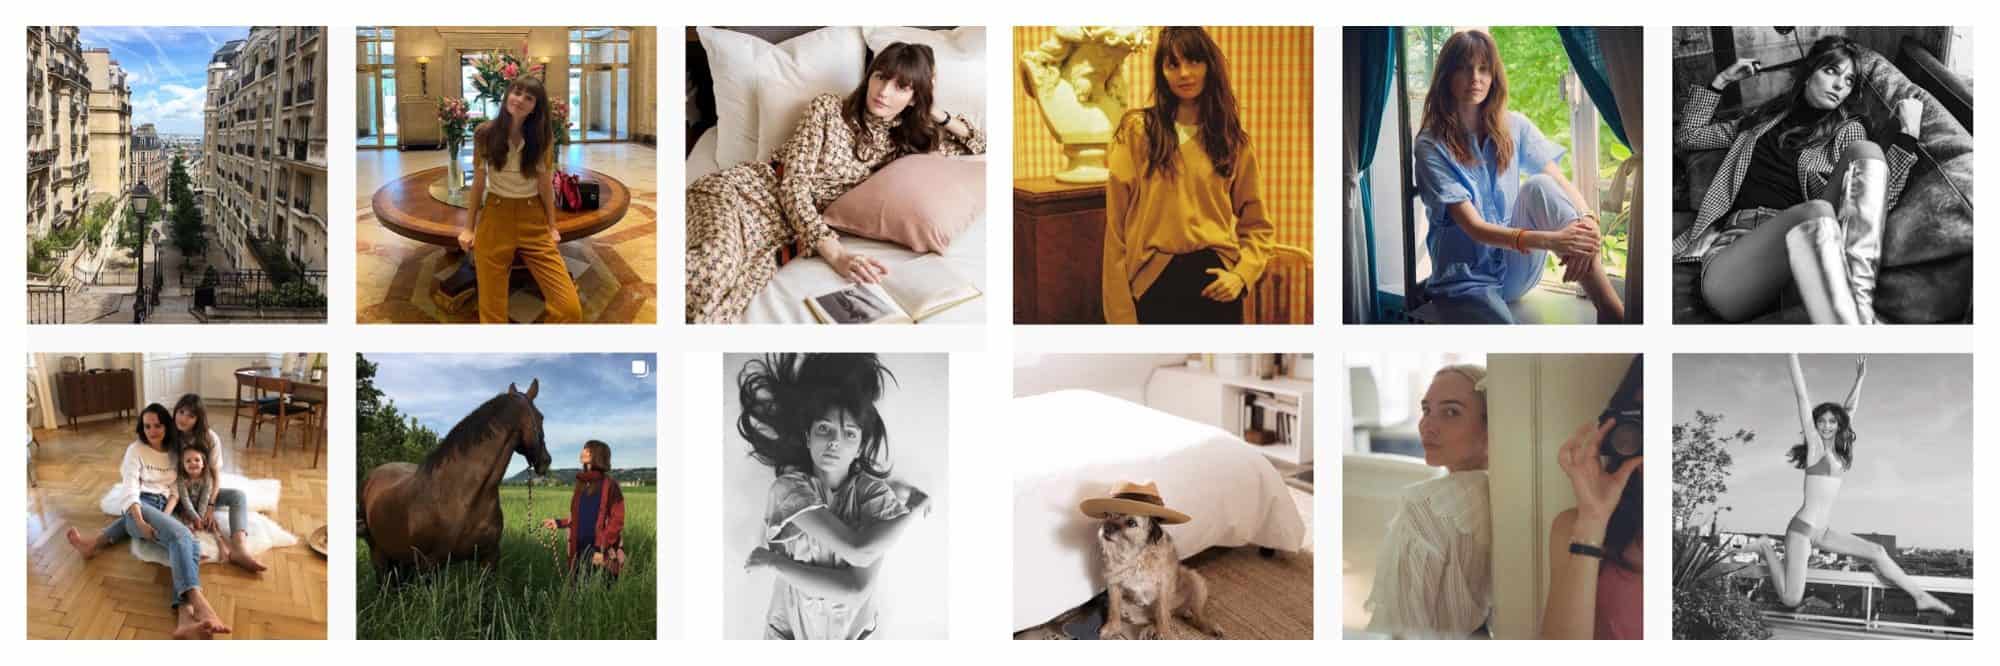 A selection of images of French Instagram fashion influencer Annabelle Belmondo.